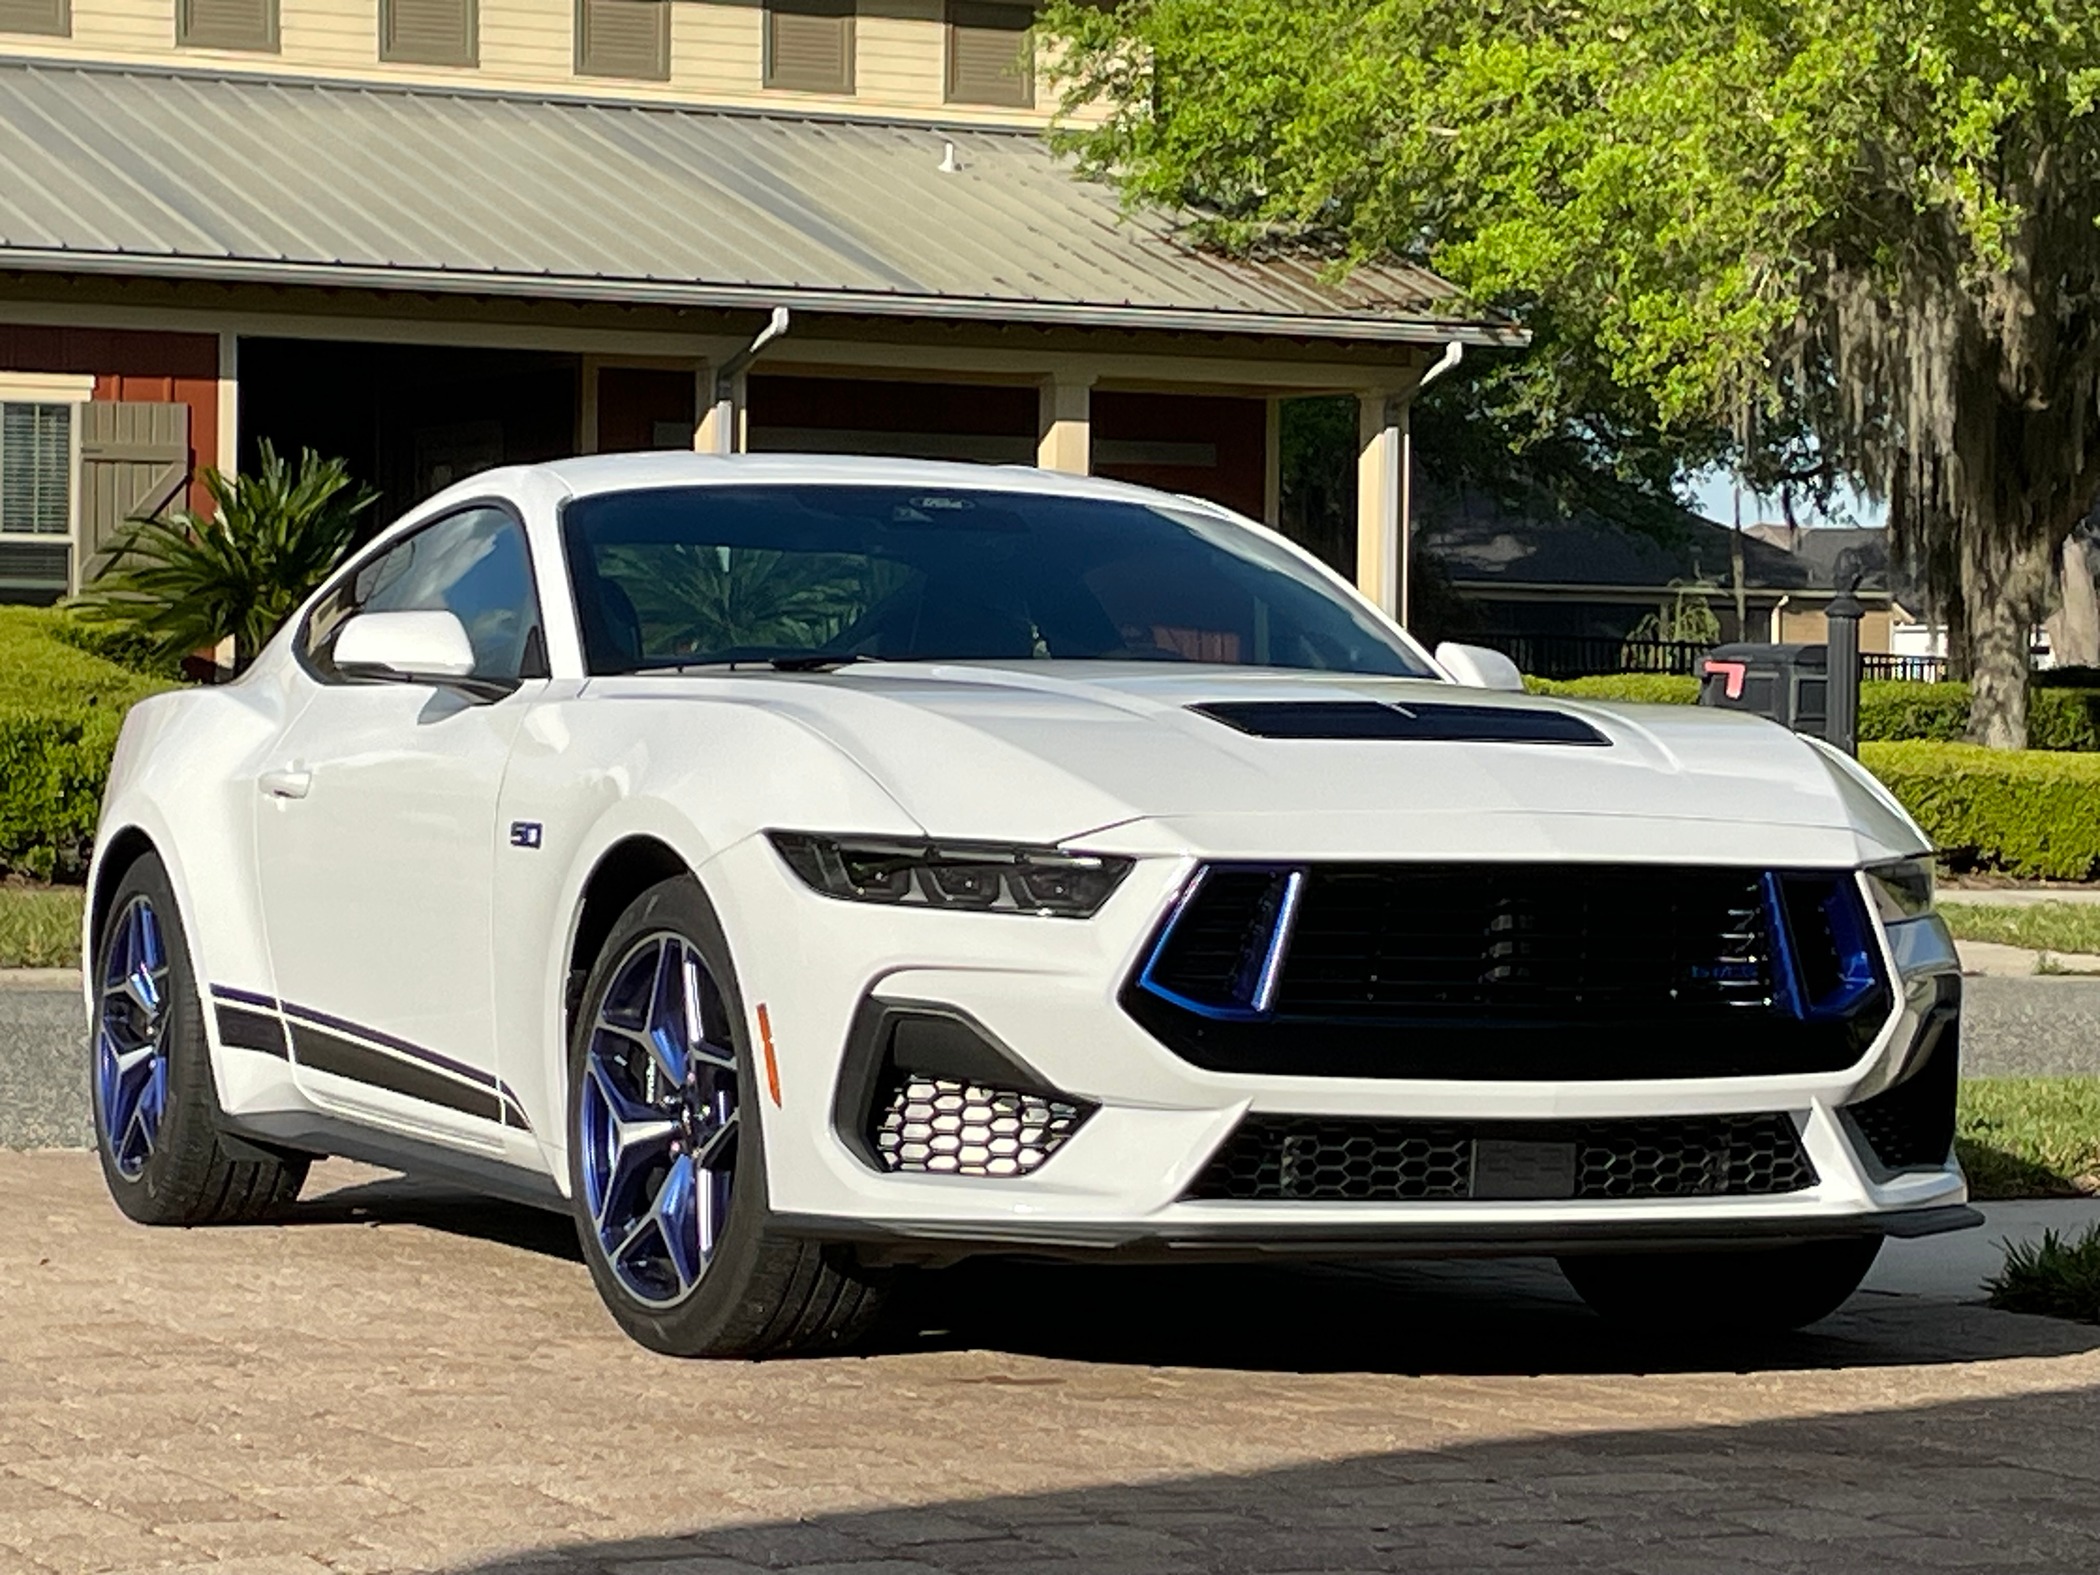 S650 Mustang Official OXFORD WHITE Mustang S650 Thread 24gt cs8